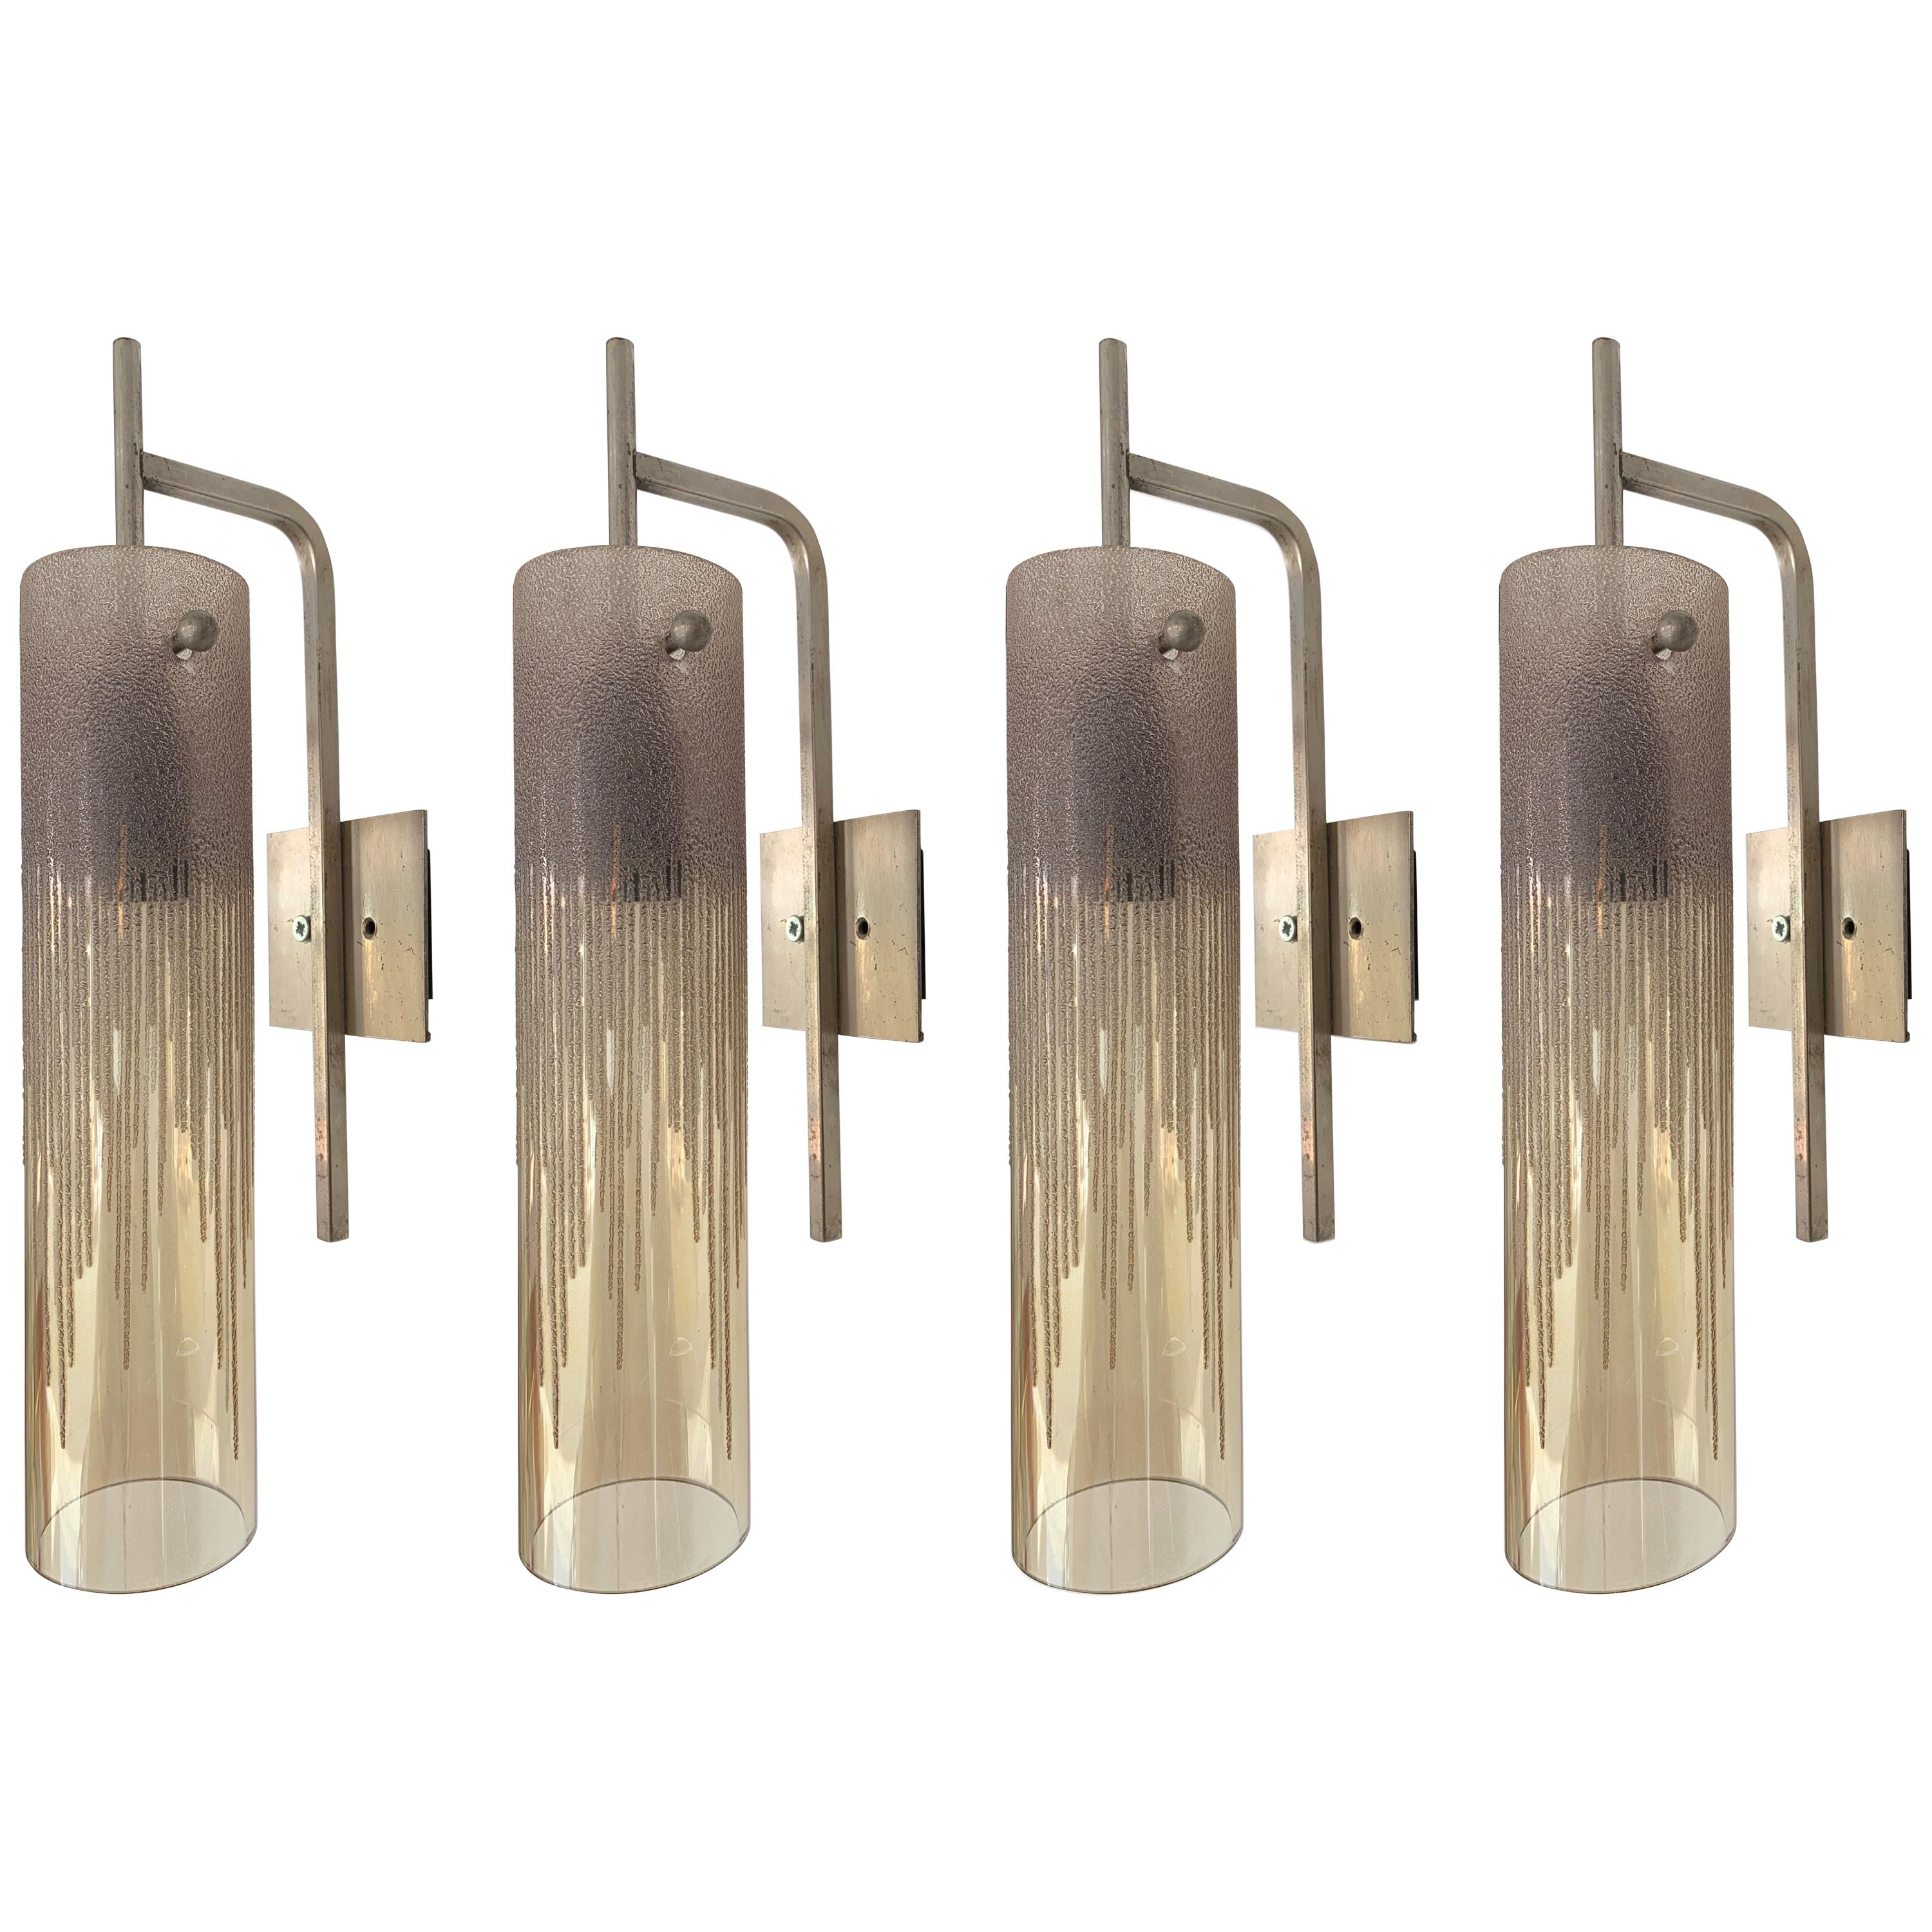 Pair of Sconces Acid Decor Glass and Silver Brass by Poliarte, Italy, 1970s